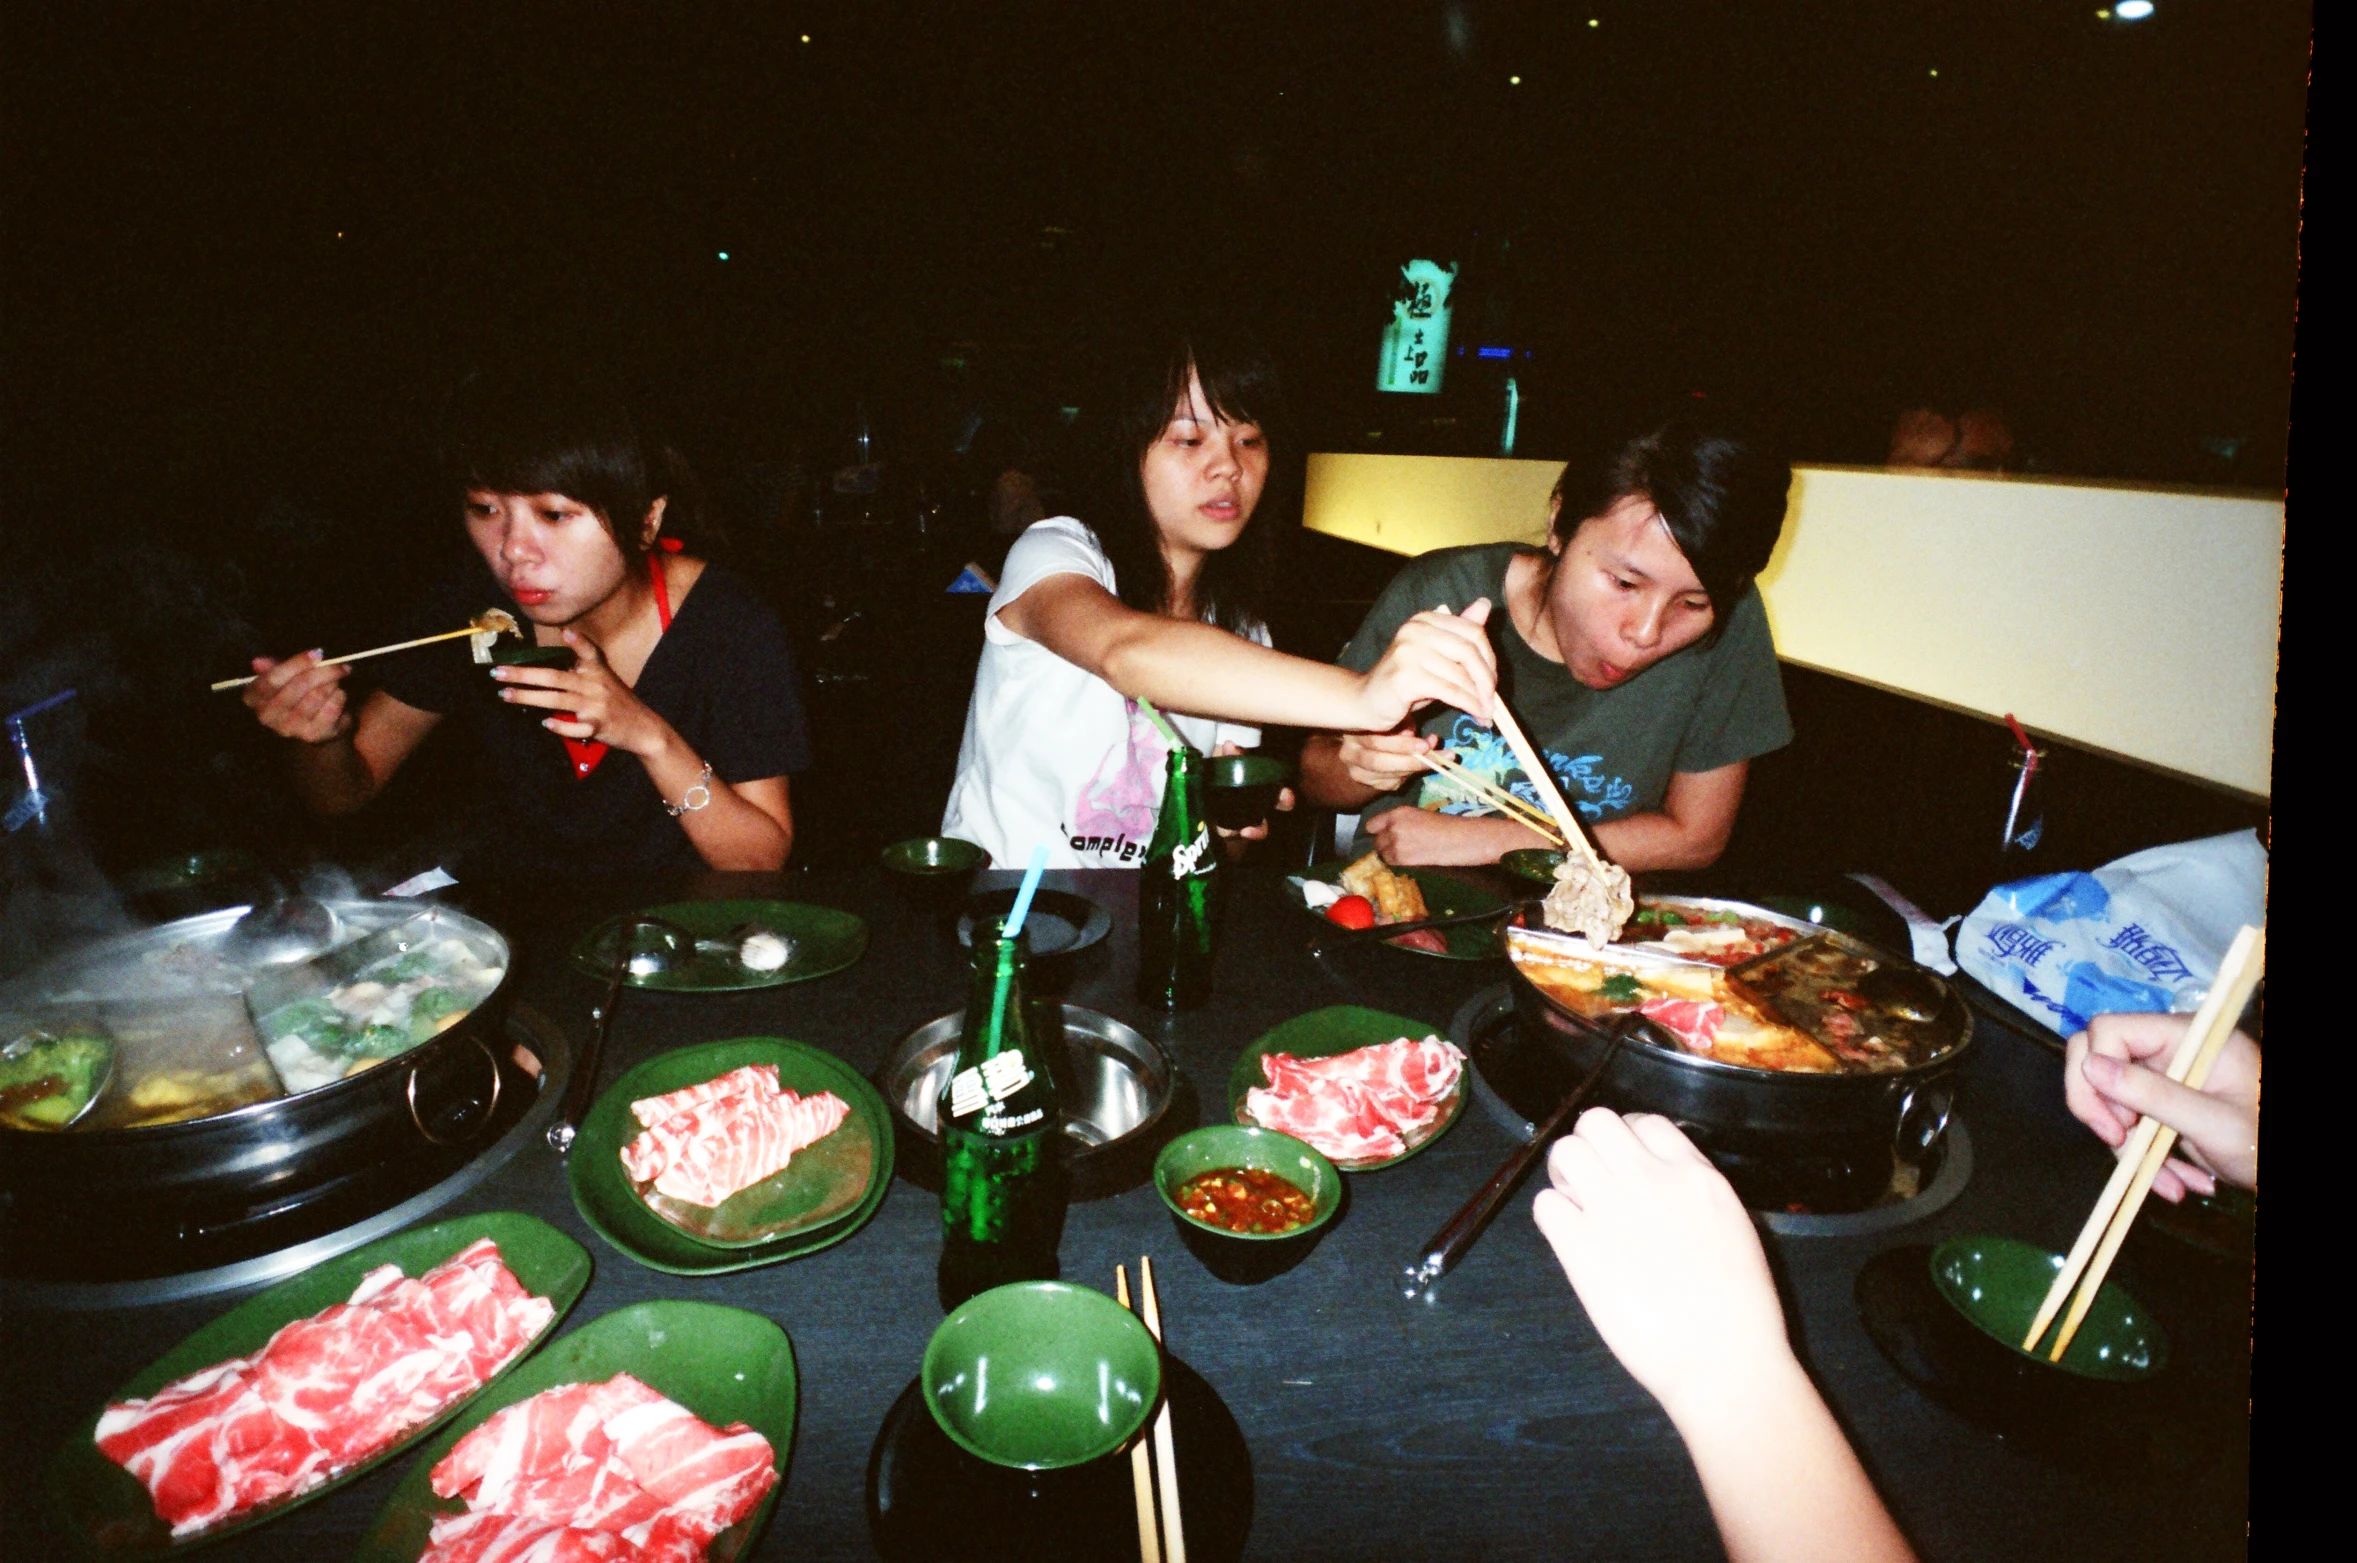 group of people are eating food while sitting at a table